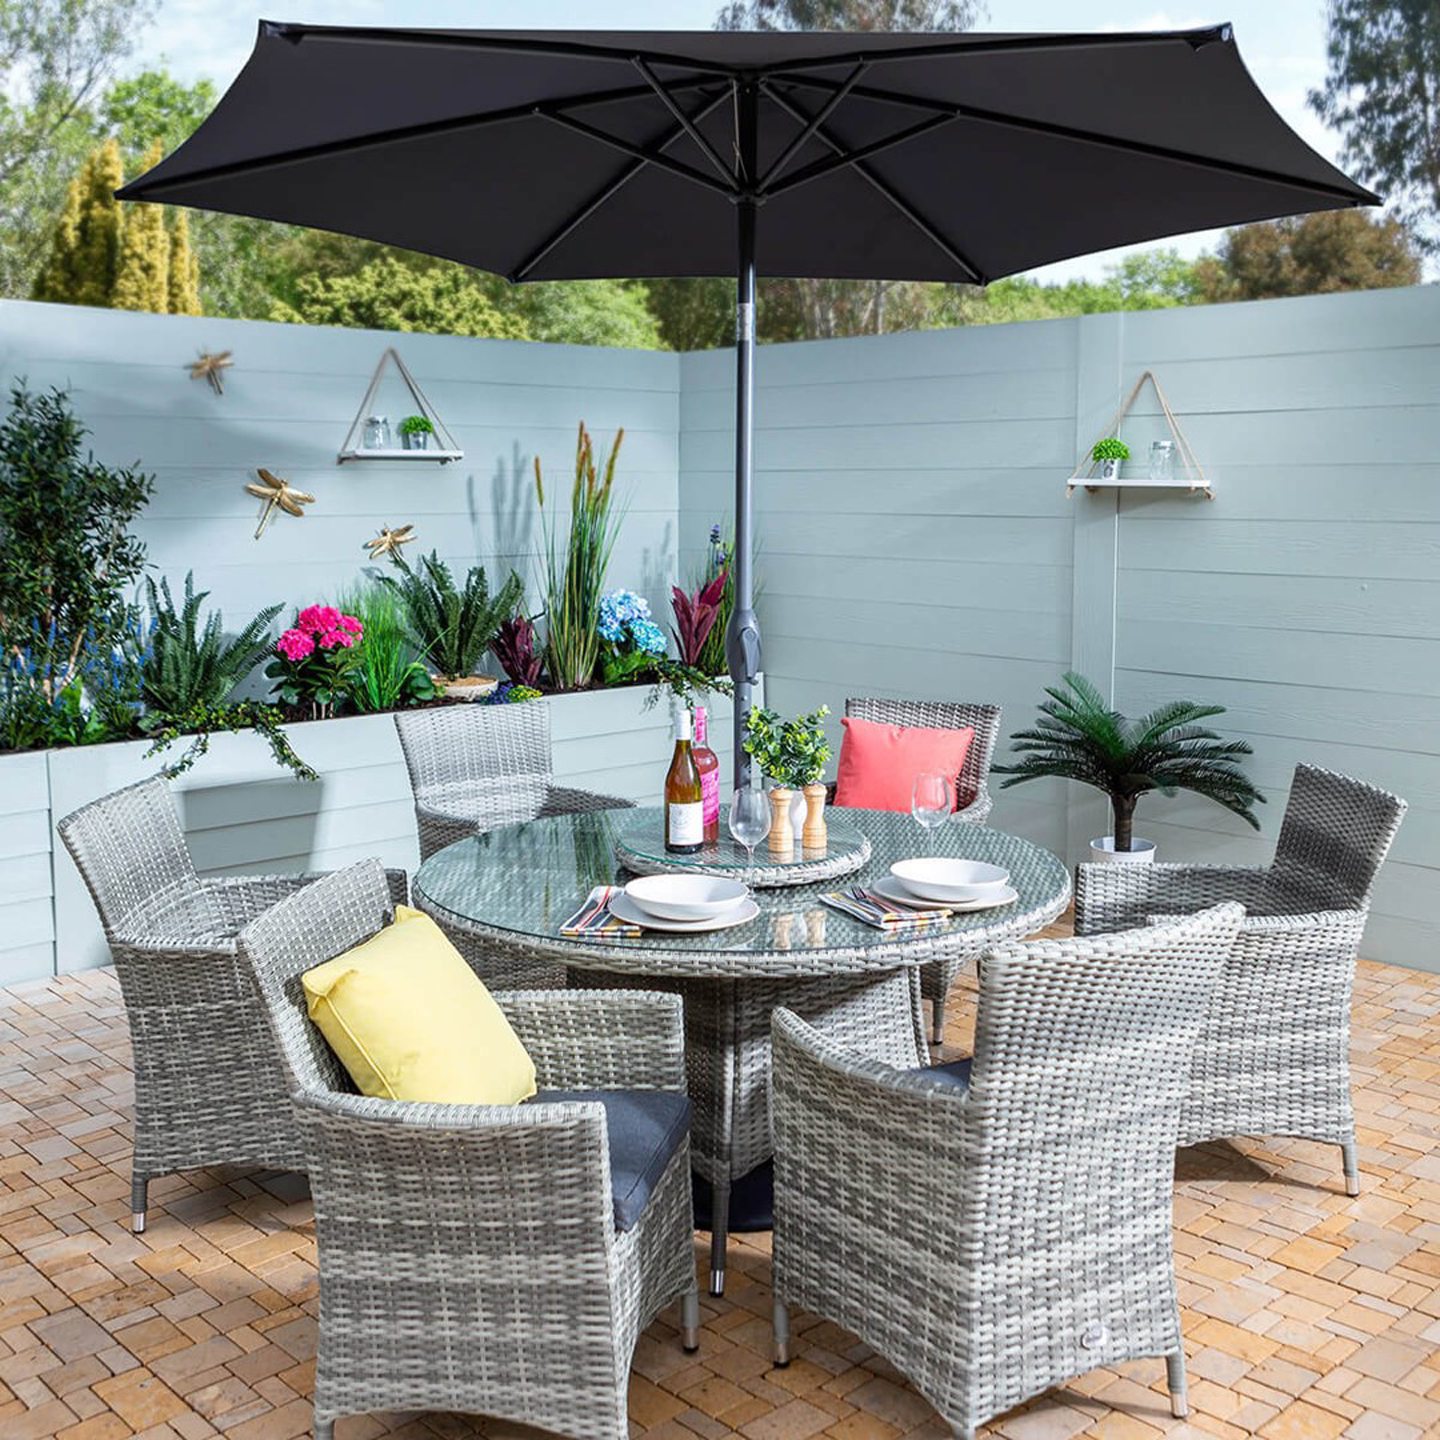 Outdoor dining table, chairs and parasol